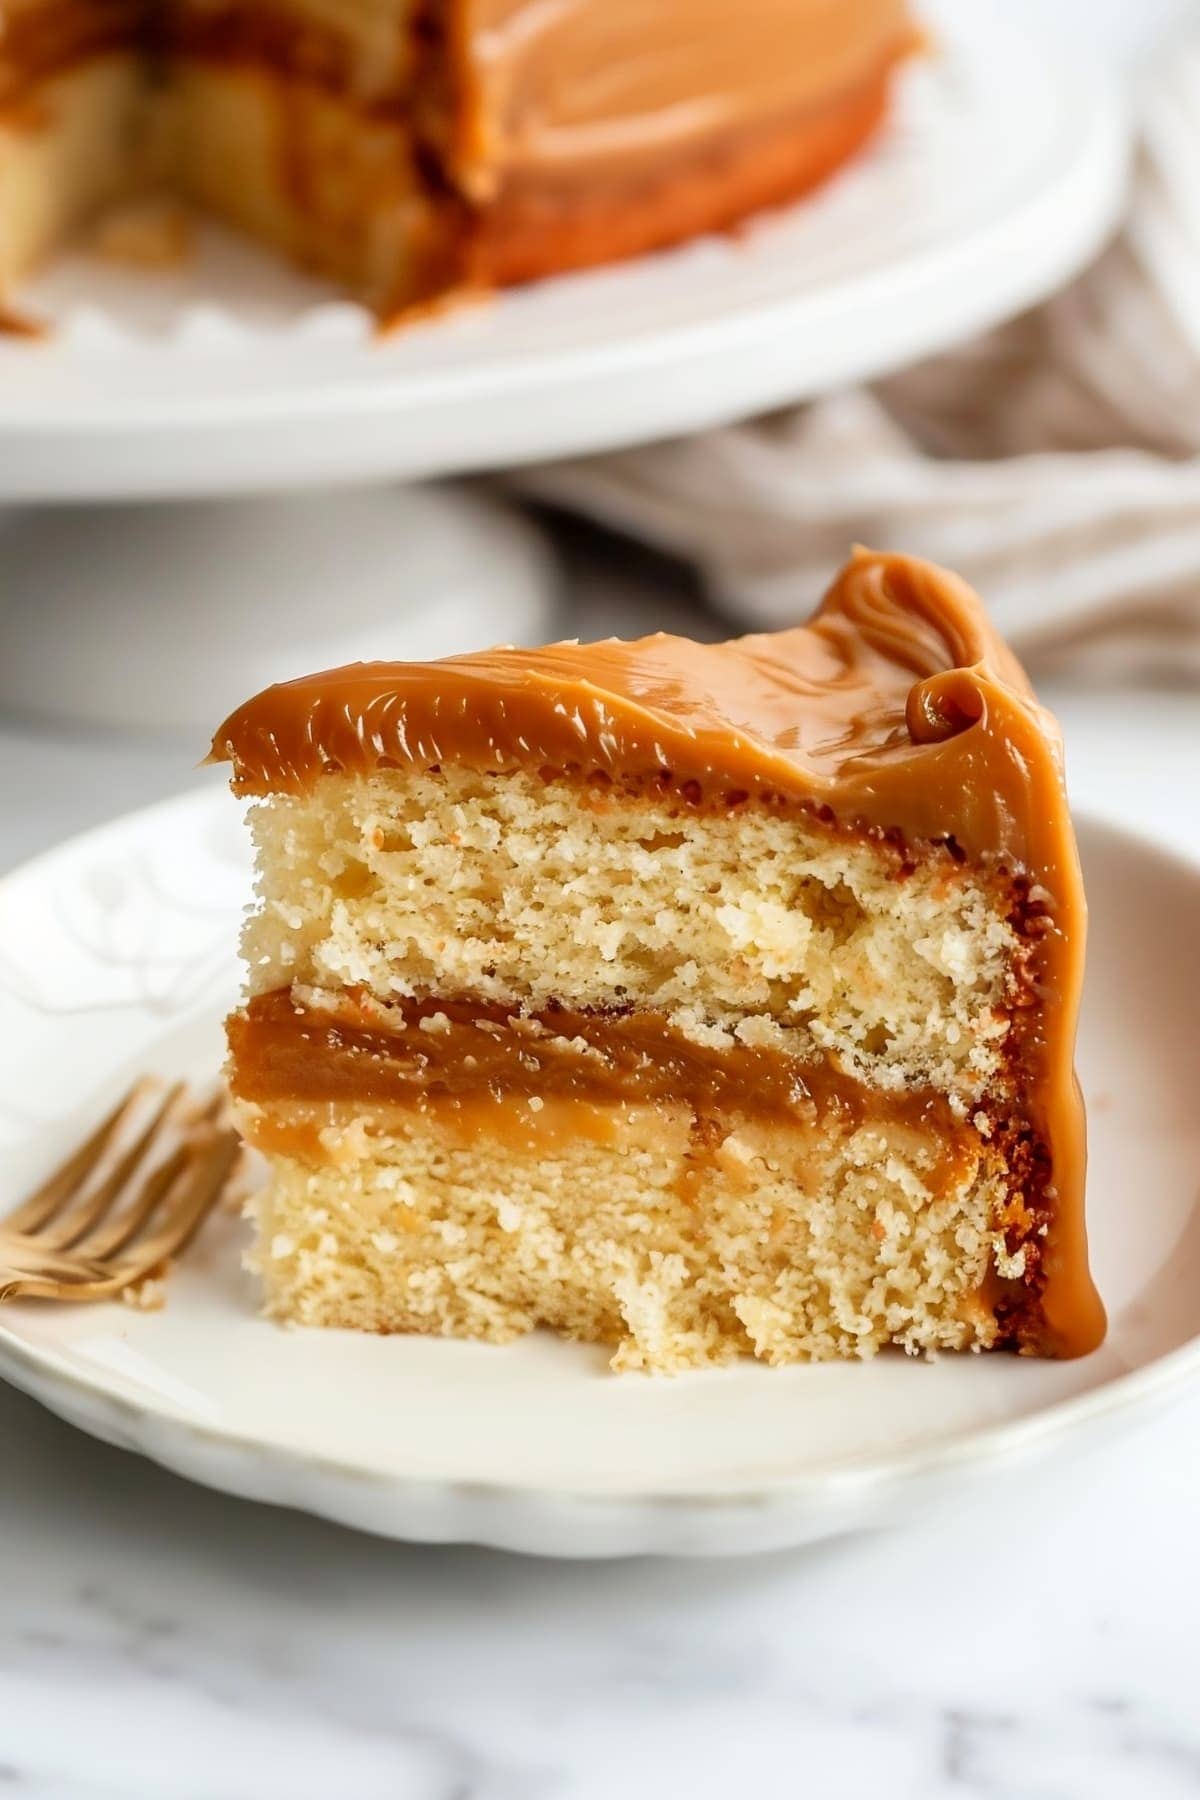 A slice of cake with caramel frosting on a white plate ready to be enjoyed